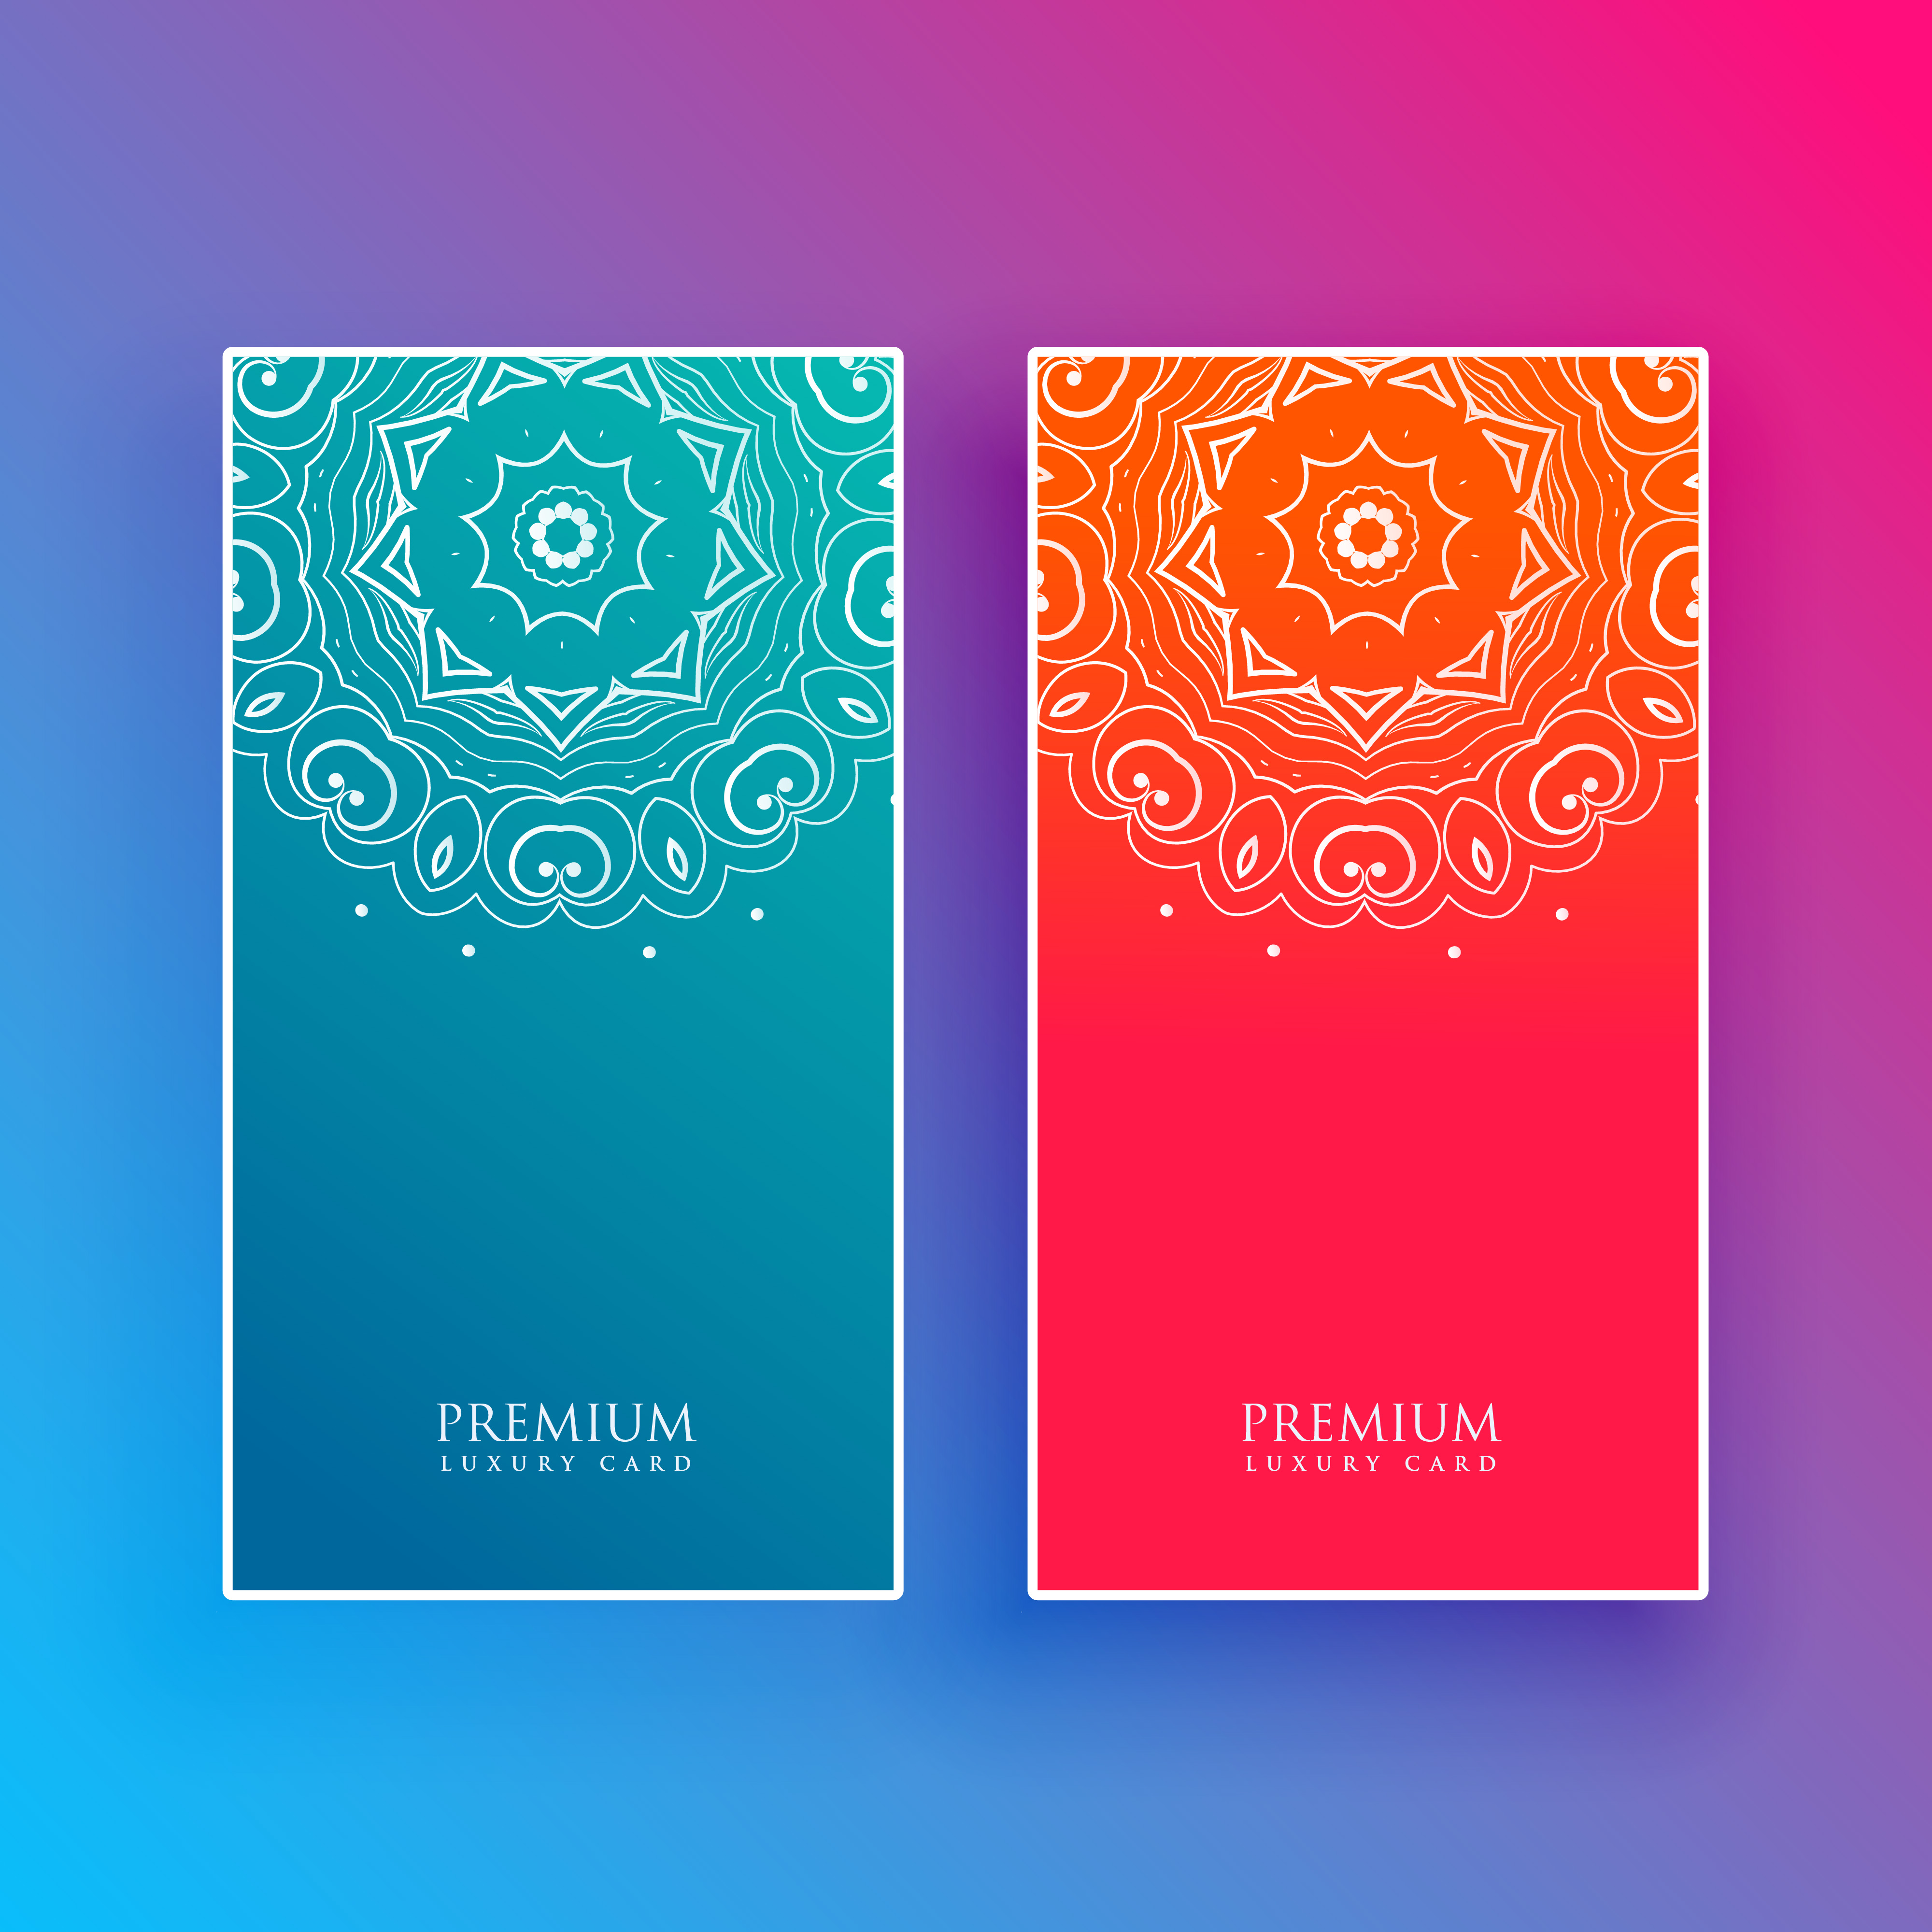 bright mandala banners in blue and red colors Download 